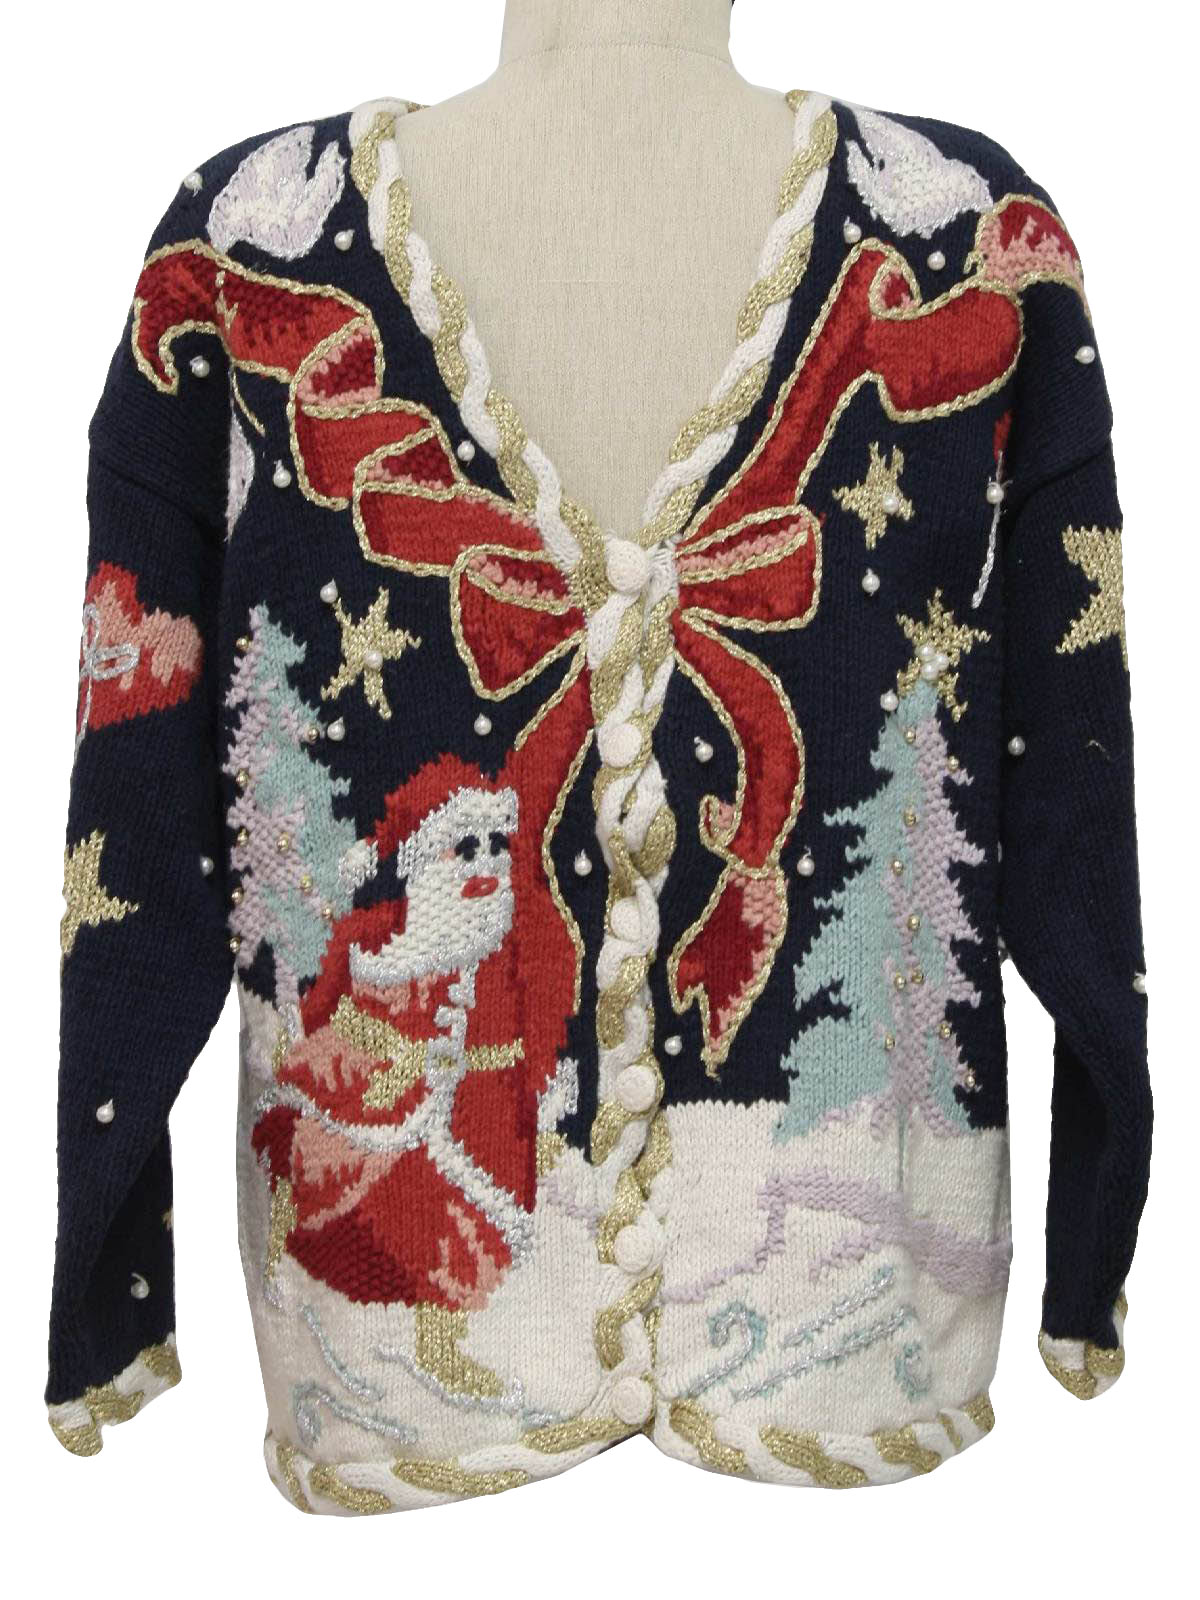 Stupendously Ugly Cardigan Christmas Sweater: -Stitches In Time- Unisex ...